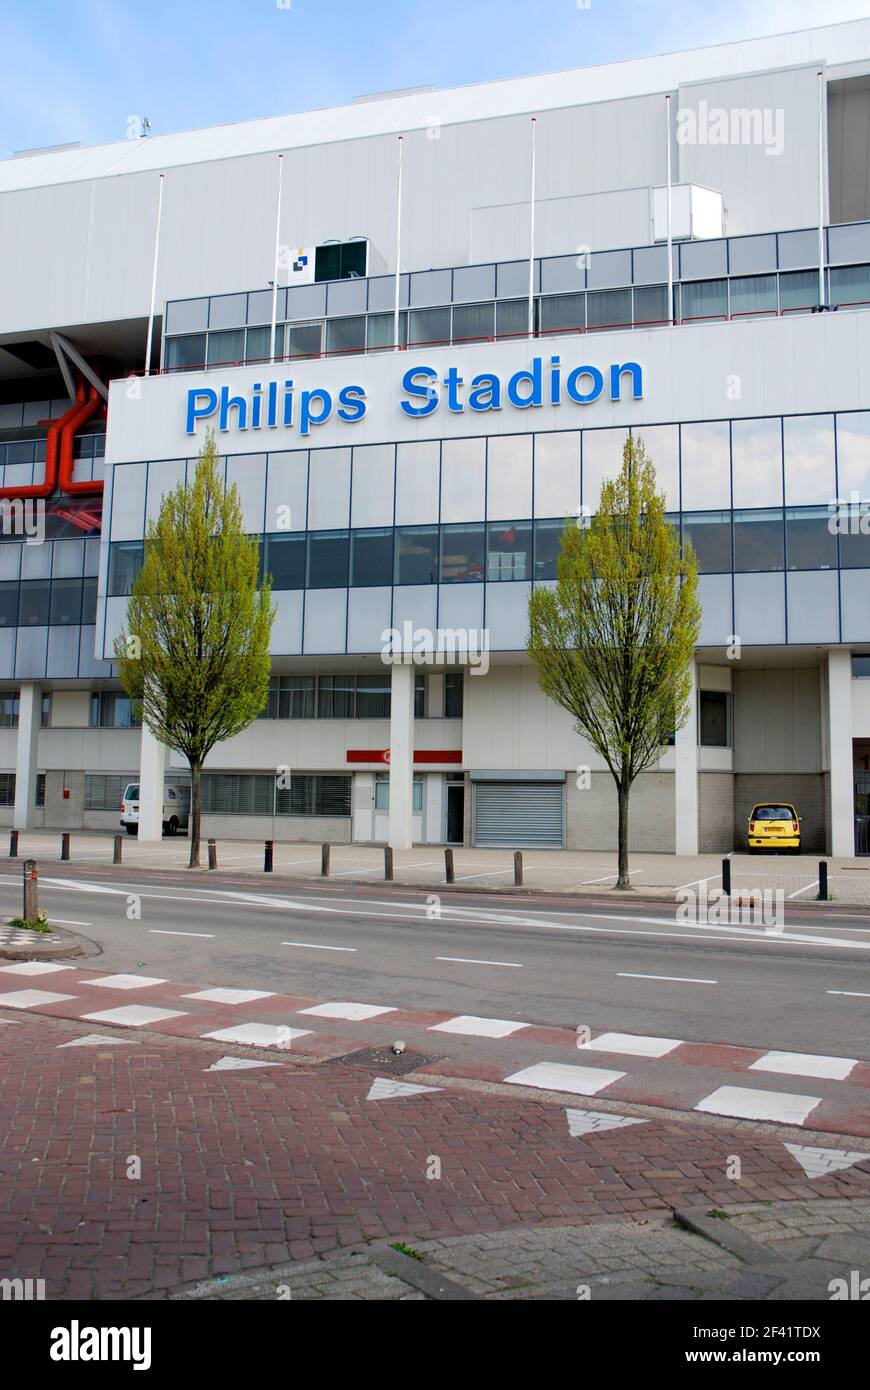 Eindhoven, Netherlands 04-11-2009 name and logo of the Philips Stadium Stock Photo